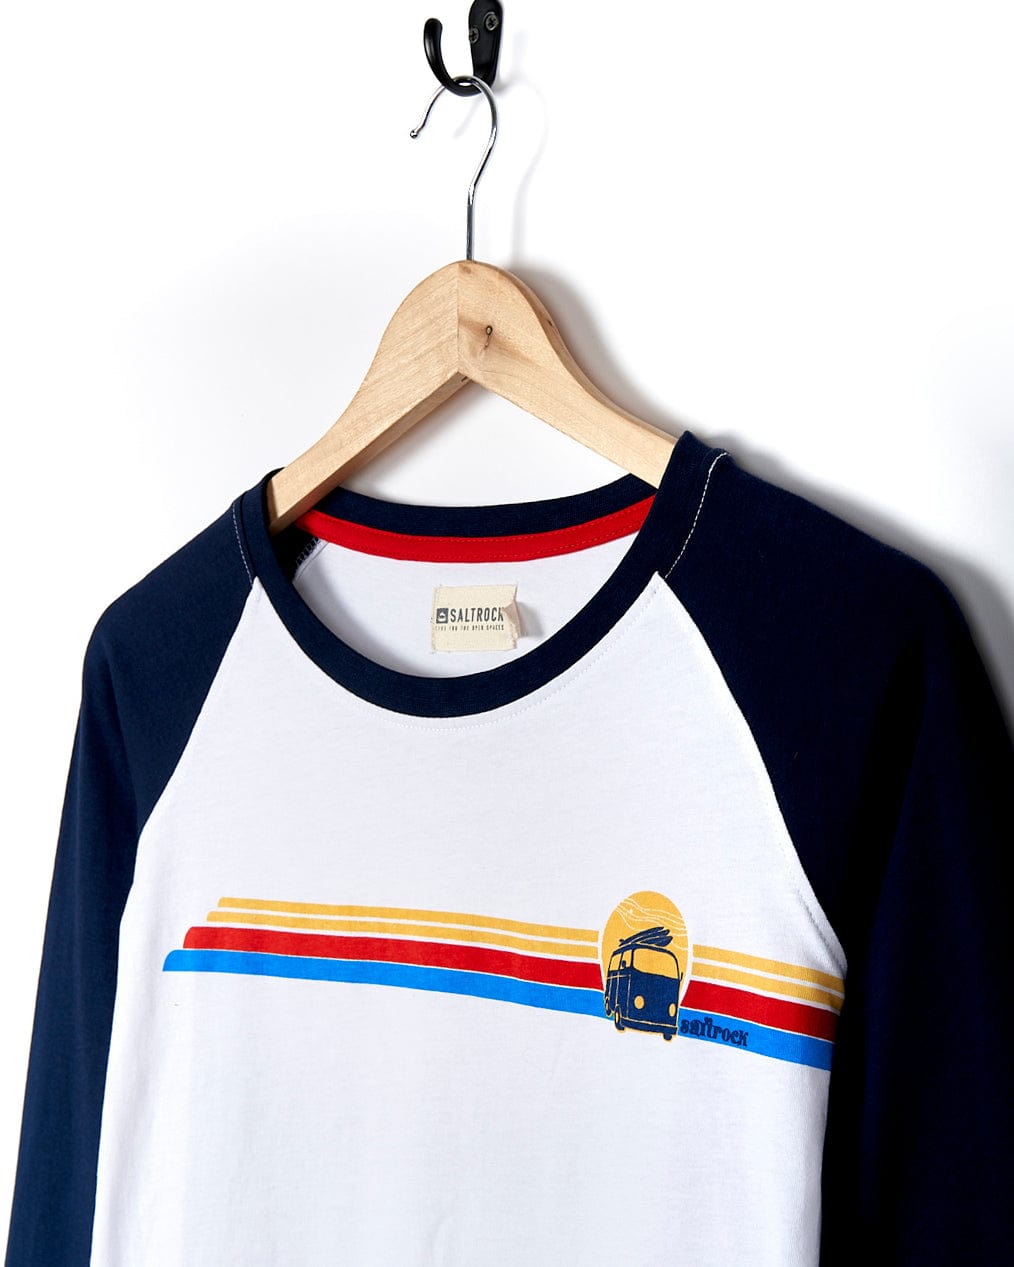 A Saltrock Celeste Stripe - Womens Long Sleeve Raglan T-Shirt - White/navy with a red, blue and yellow stripe.